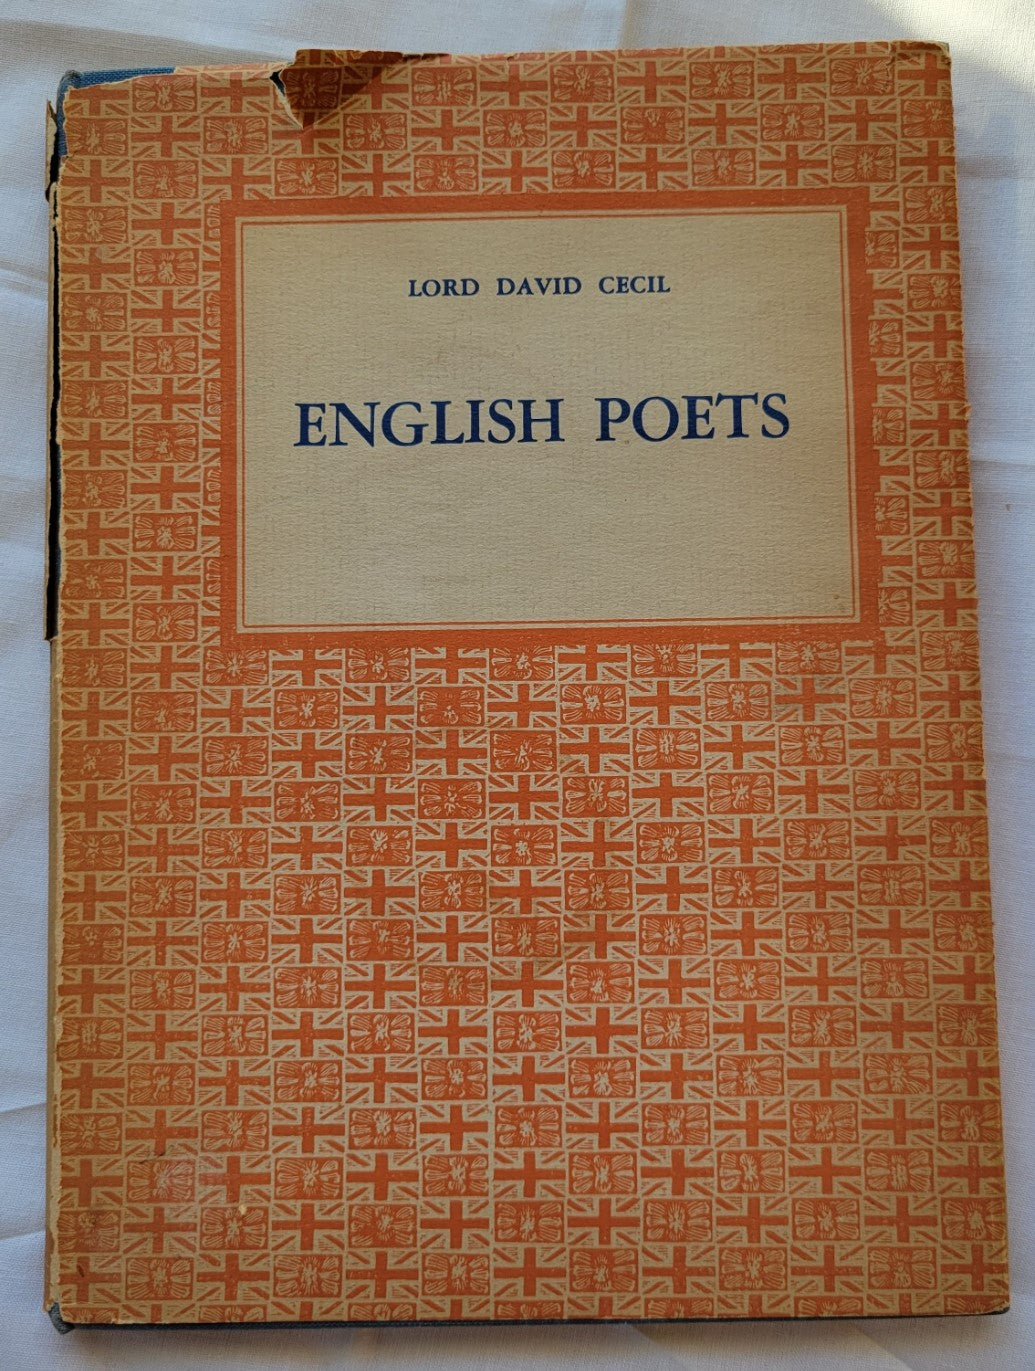 Vintage book for sale "The English Poets" by Lord David Cecil, published by Hastings House, 1940. Front cover with jacket.